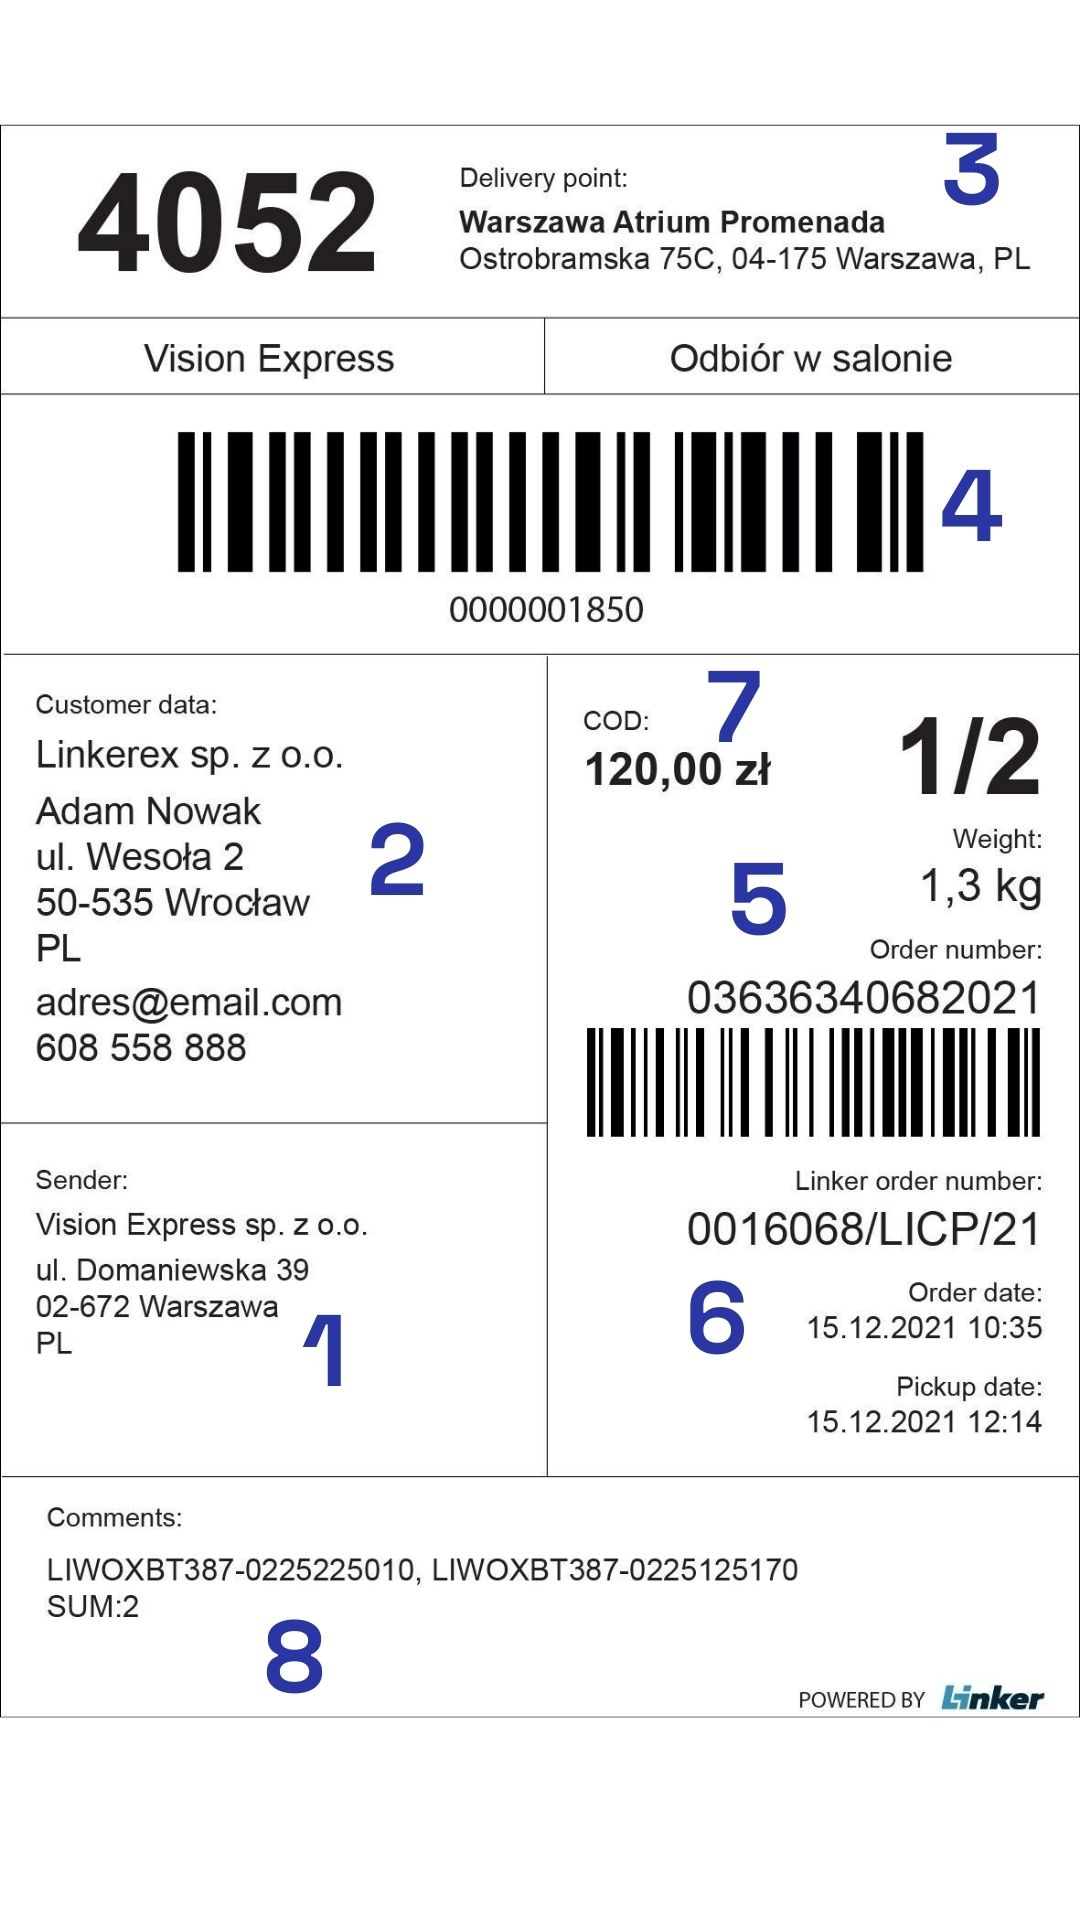 5 things you need to know about the Shipping Labels